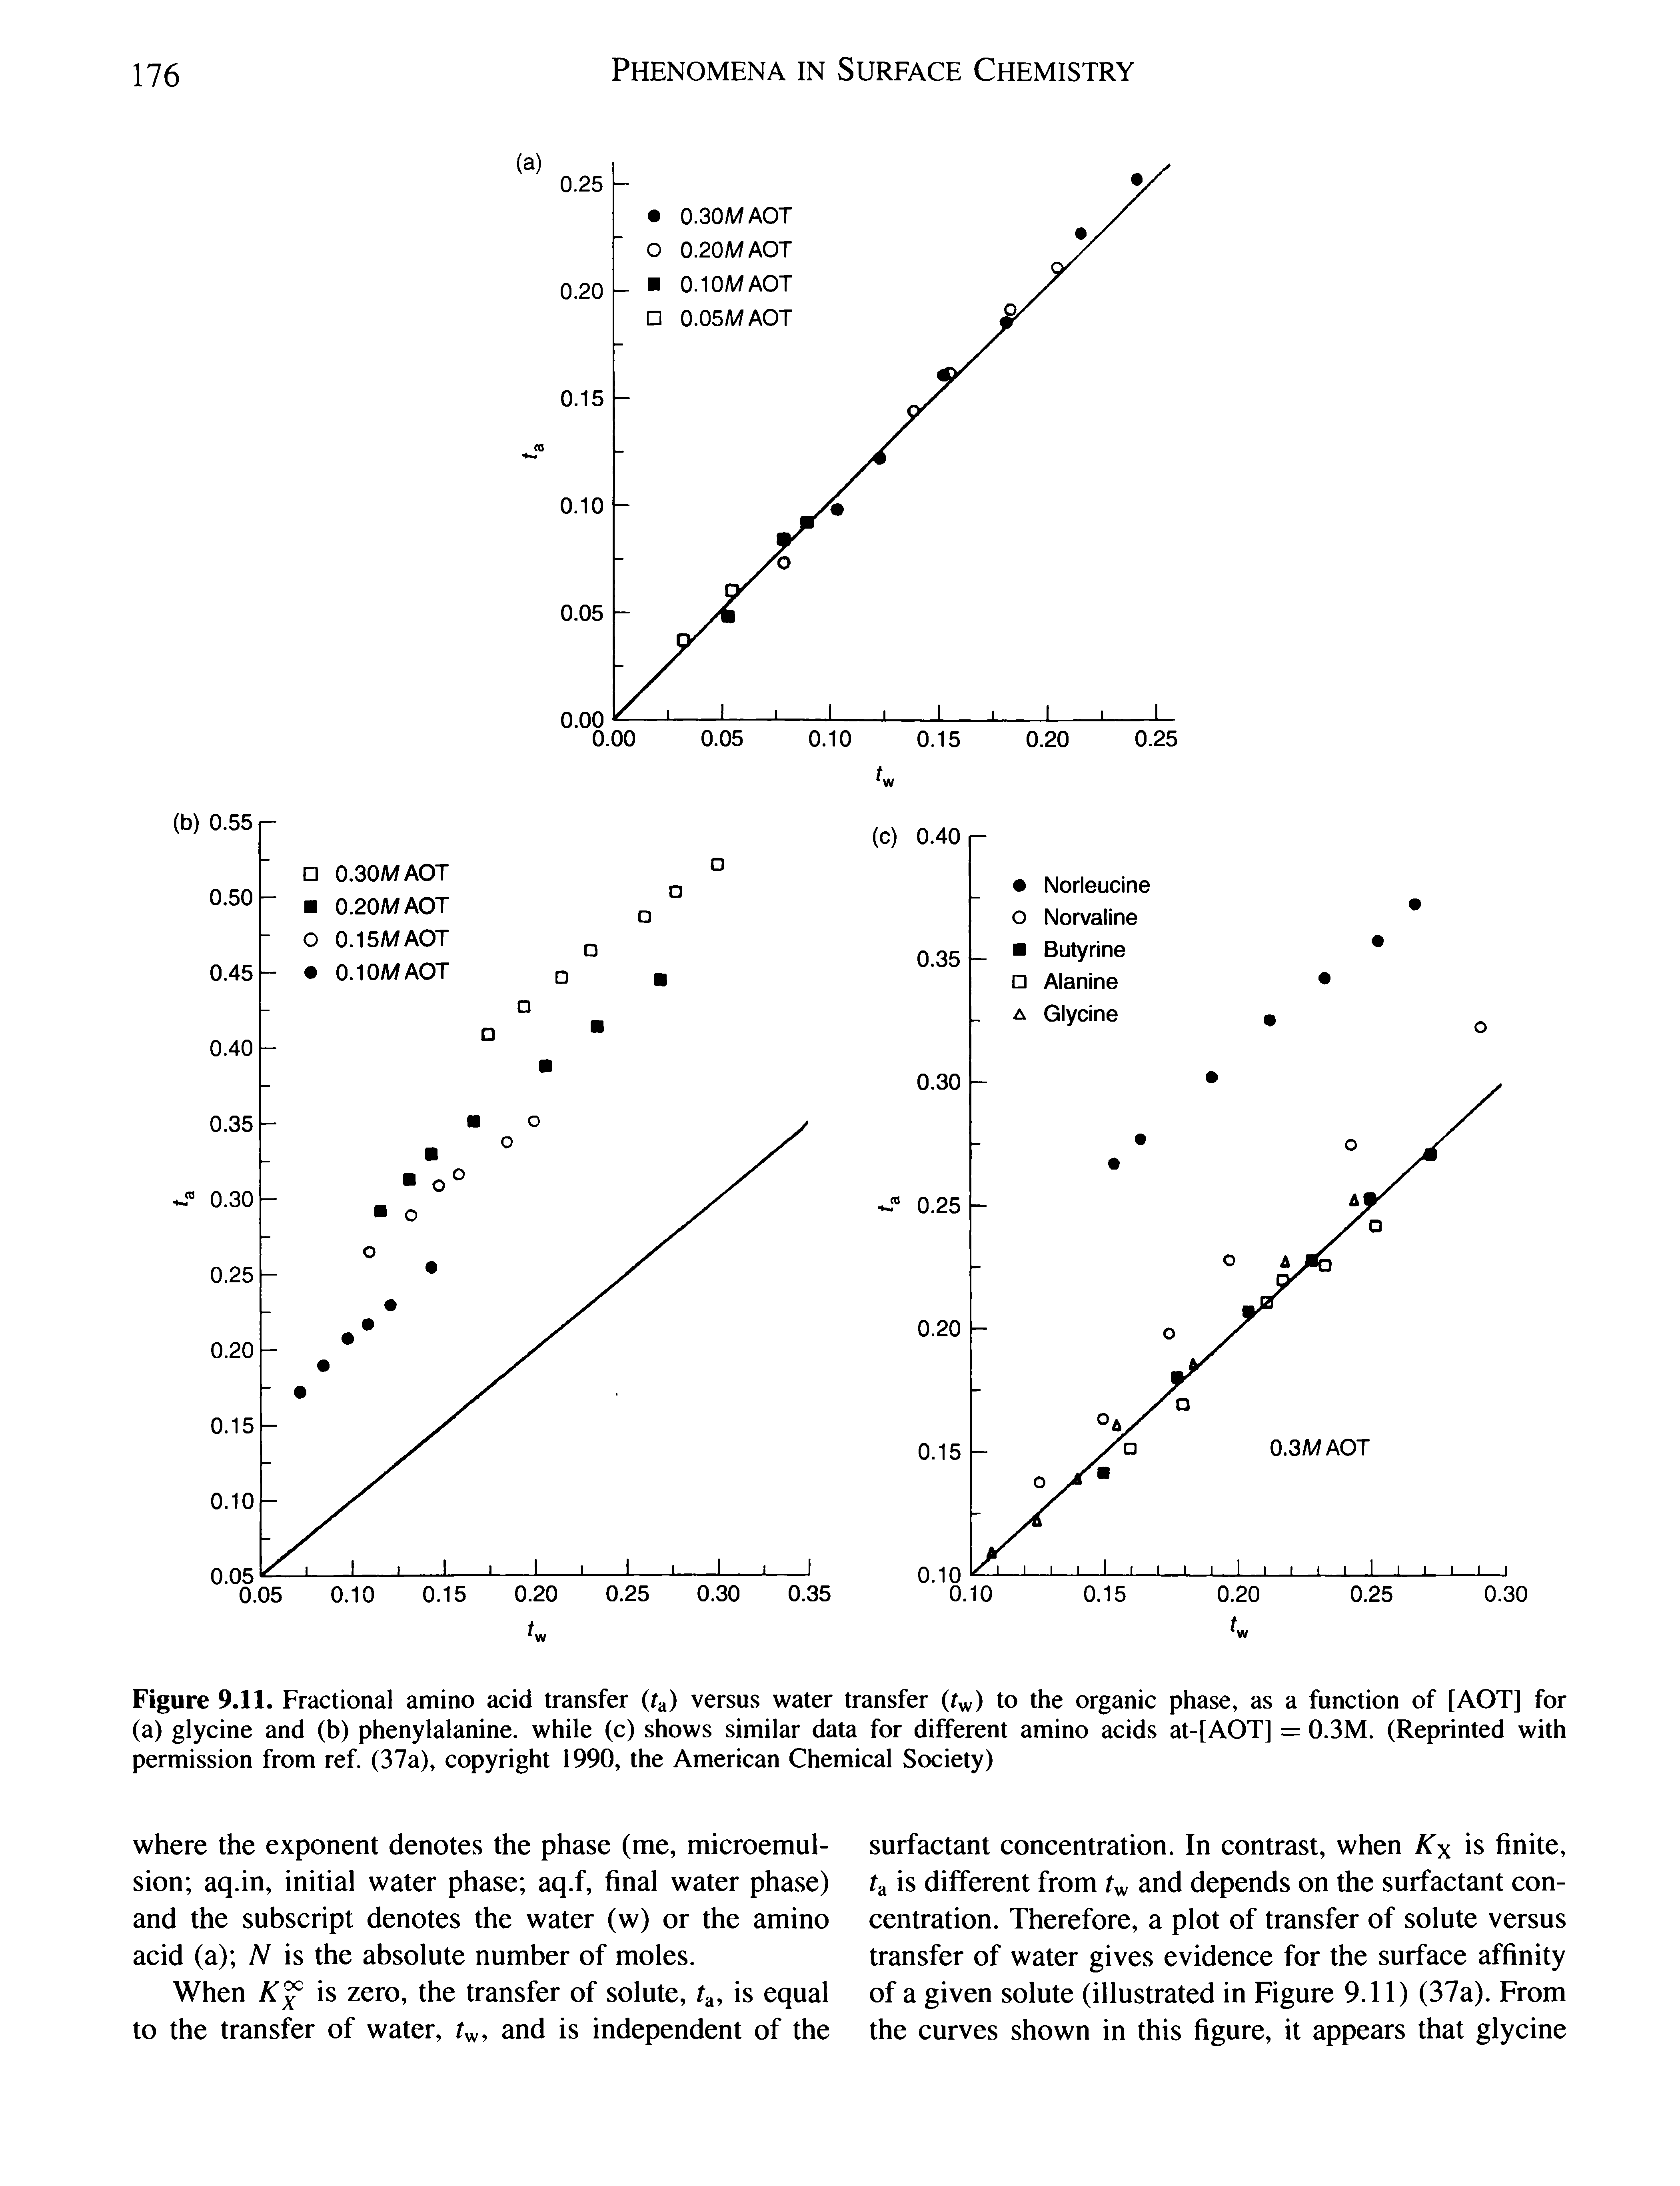 Figure 9.11. Fractional amino acid transfer (fa) versus water transfer (r ) to the organic phase, as a function of [AOT] for (a) glycine and (b) phenylalanine, while (c) shows similar data for different amino acids at-[AOT] = 0.3M. (Reprinted with permission from ref. (37a), copyright 1990, the American Chemical Society)...